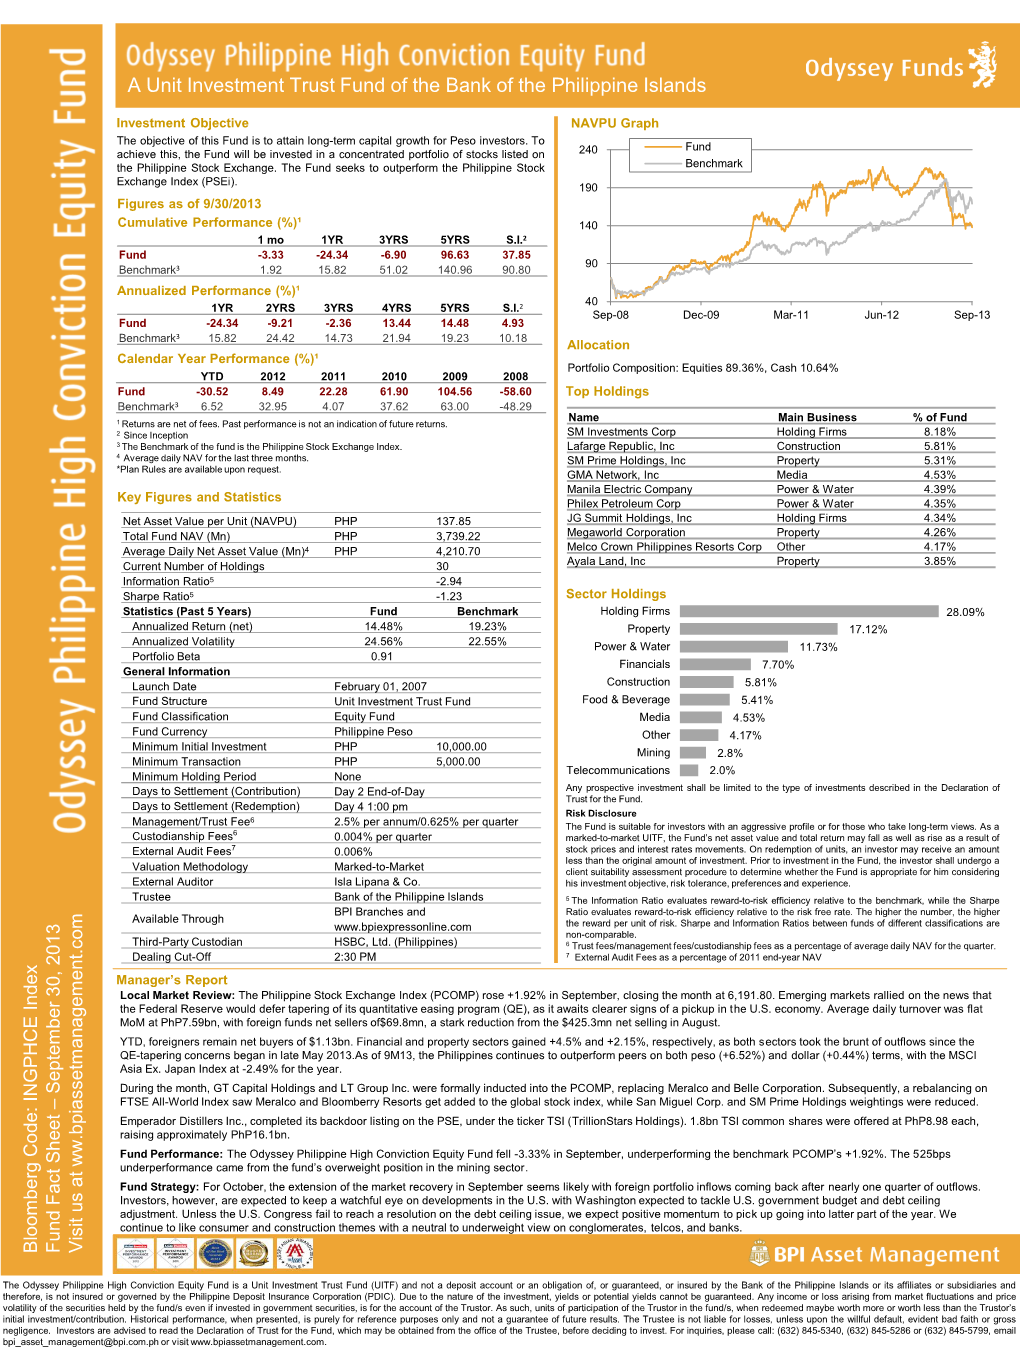 Odyssey Philippine High Conviction Equity Fund FPR September 2013